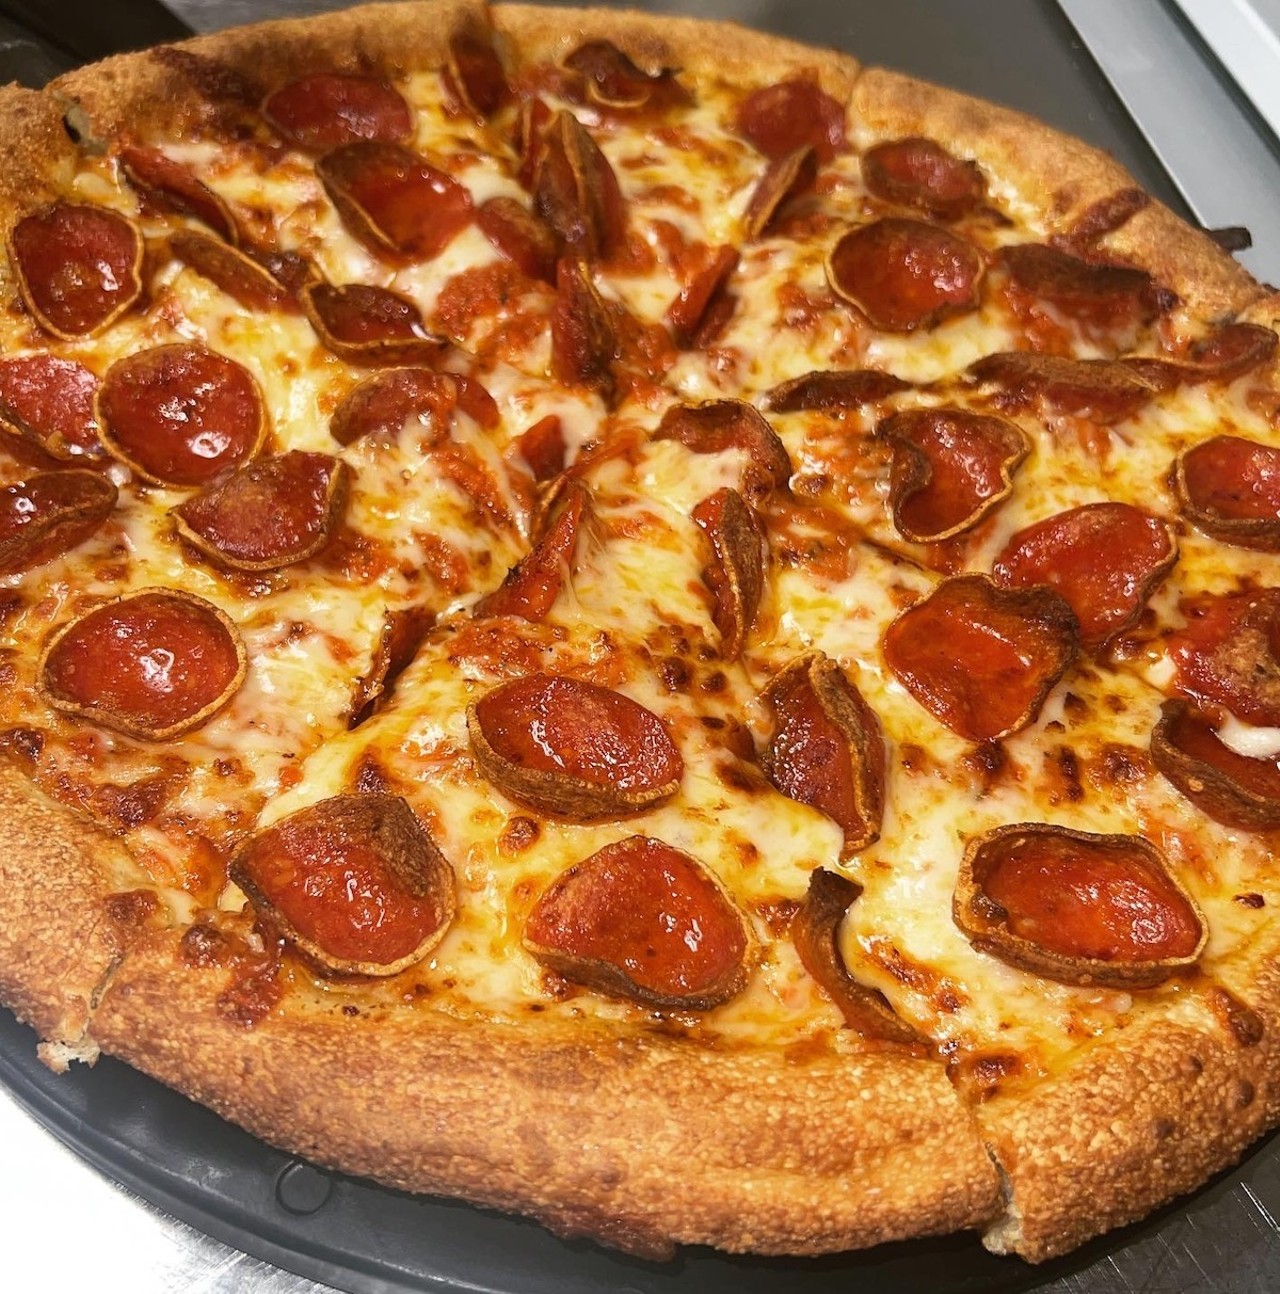 Berea Papa Johns - FREE PIZZA TODAY! Order $12 or more using your